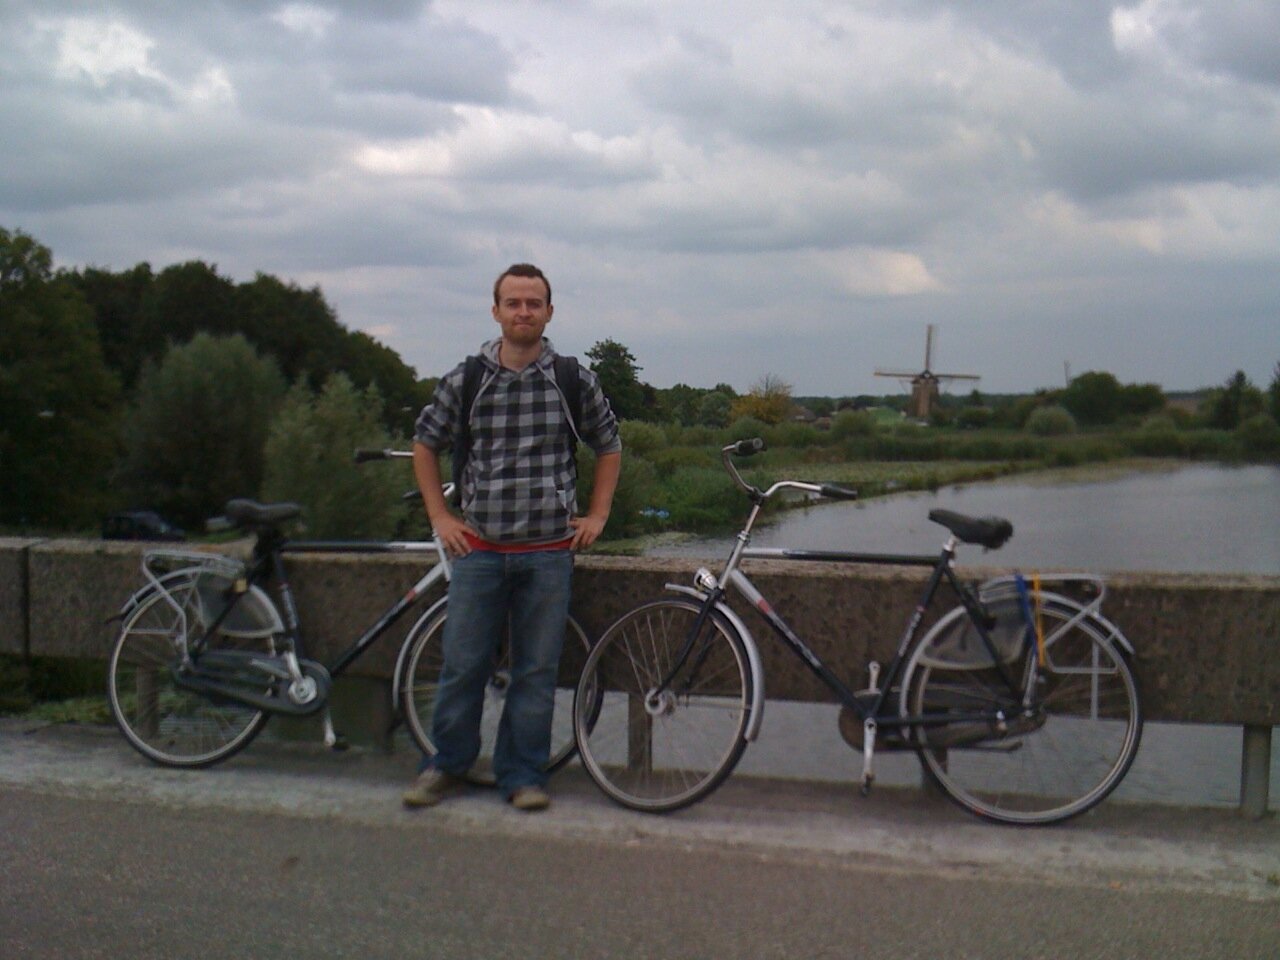 Cycling around Utrecht, here was a photo op in front of the Dutchest scene I could find.